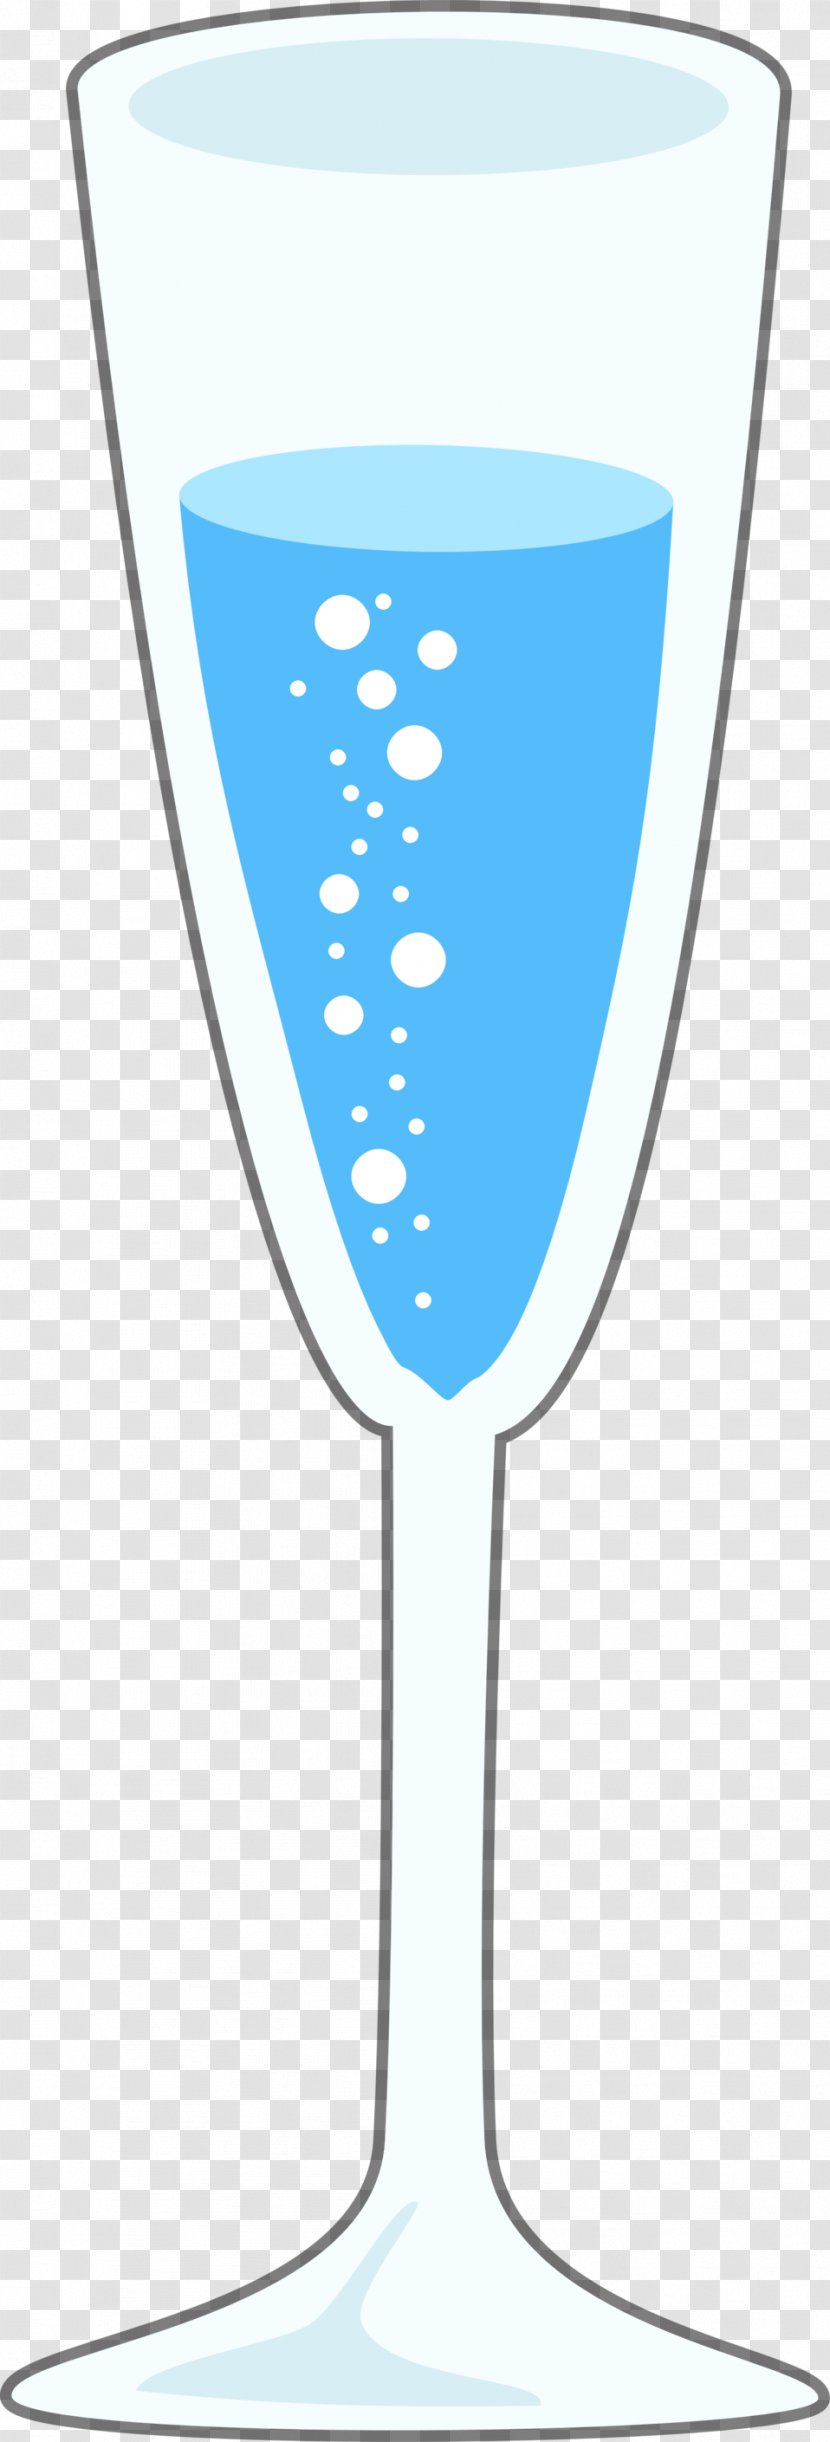 Sparkling Wine Fizzy Drinks Carbonated Water Glass Clip Art Transparent PNG